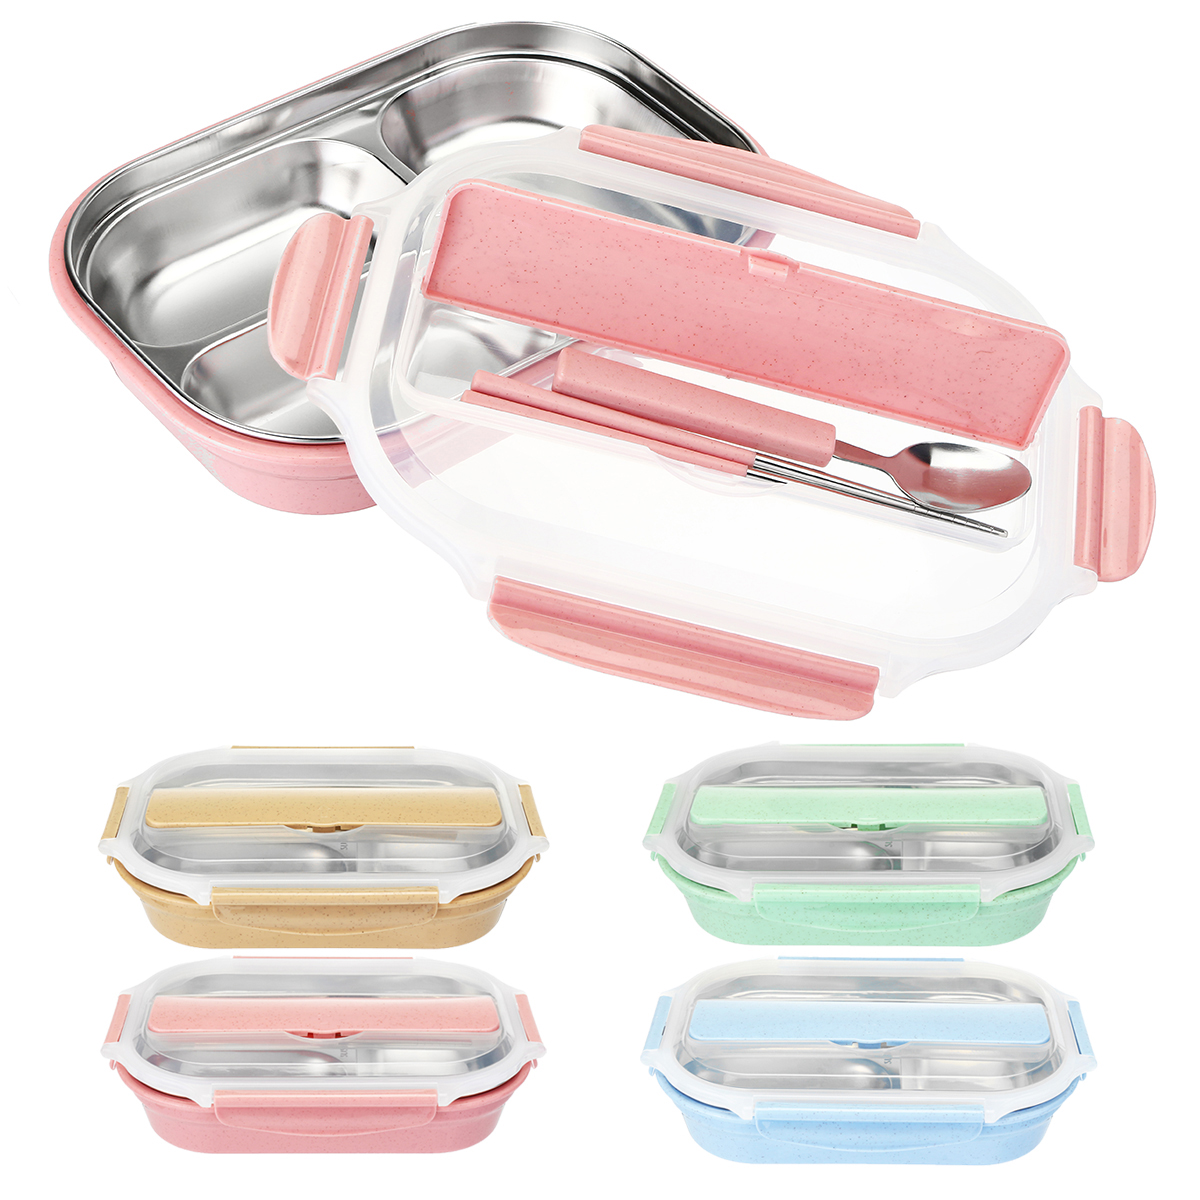 

Portable Stainless Steel Insulated Lunch Box Bento Food Container Thermal Case